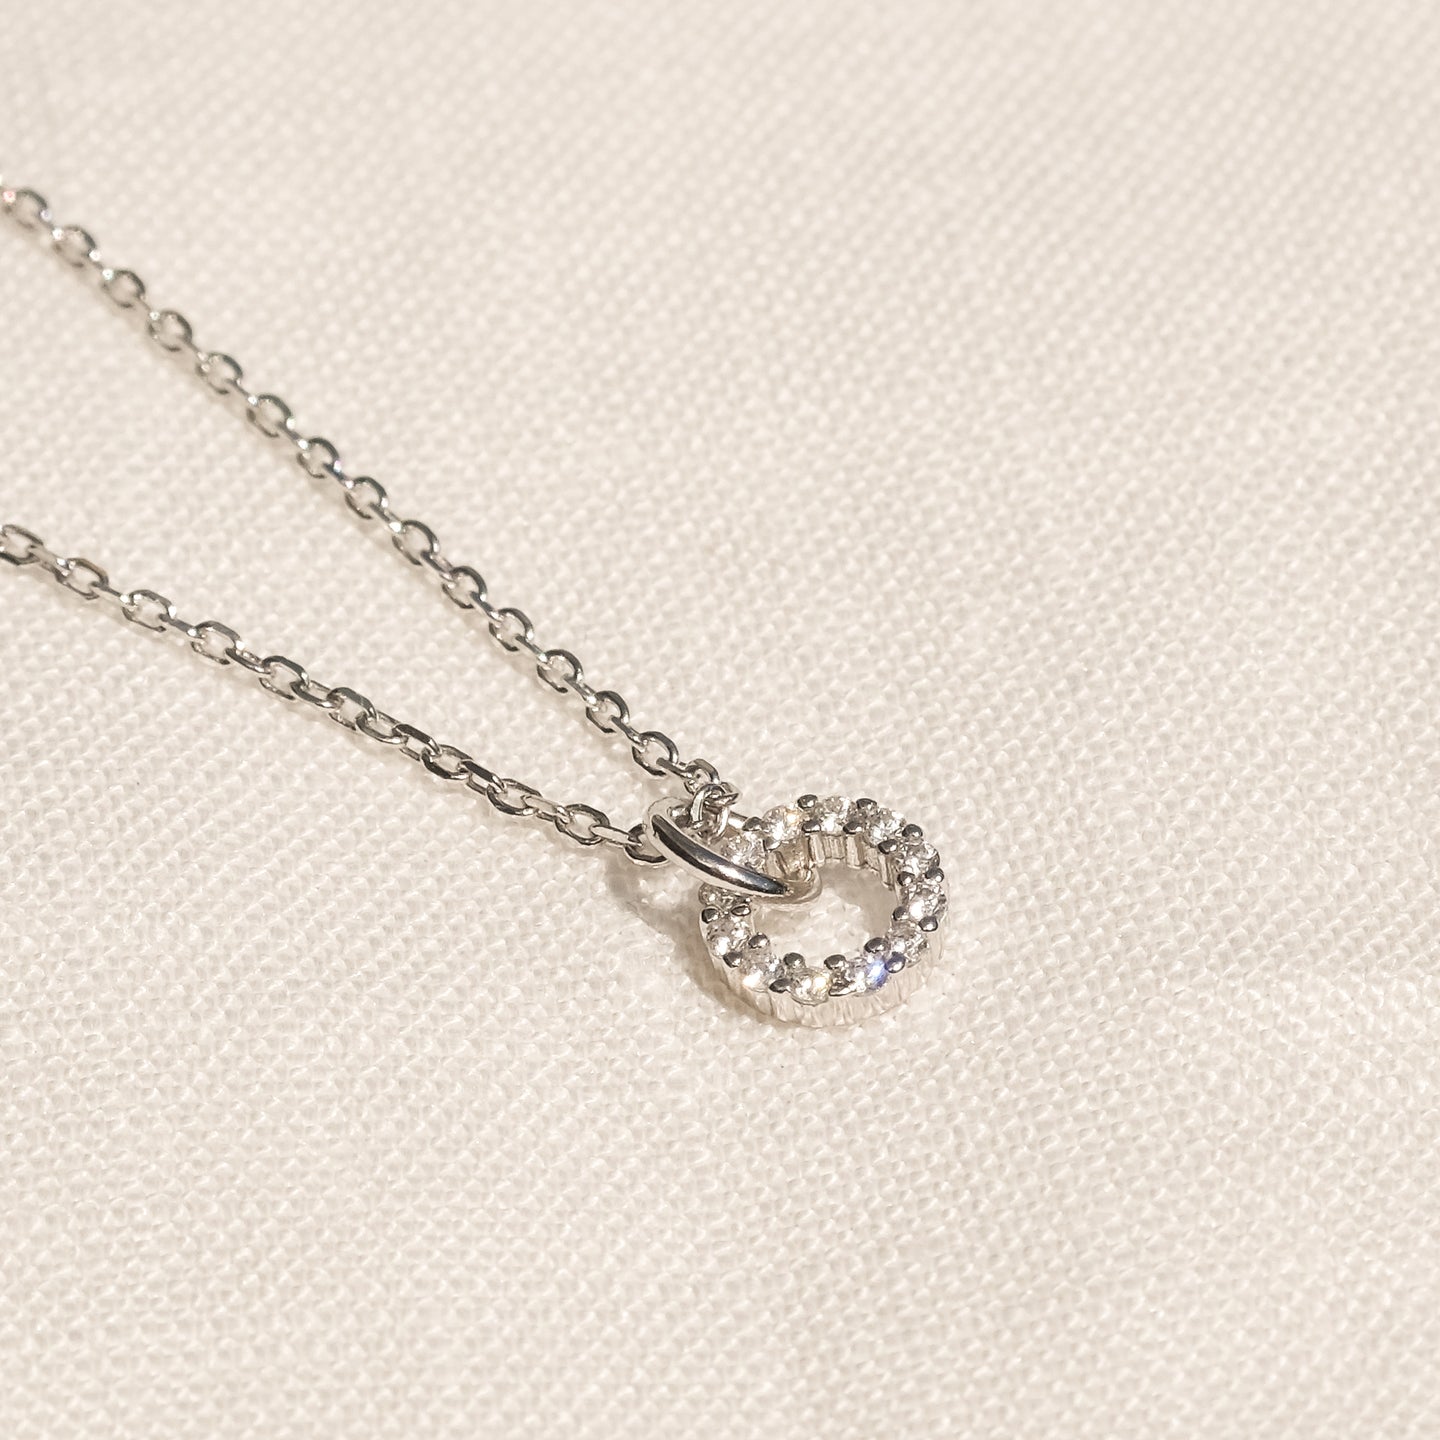 products/amir-925-sterling-silver-cz-necklace-2_7a6aa743-4c30-45e6-ac05-478c4dab6833.jpg